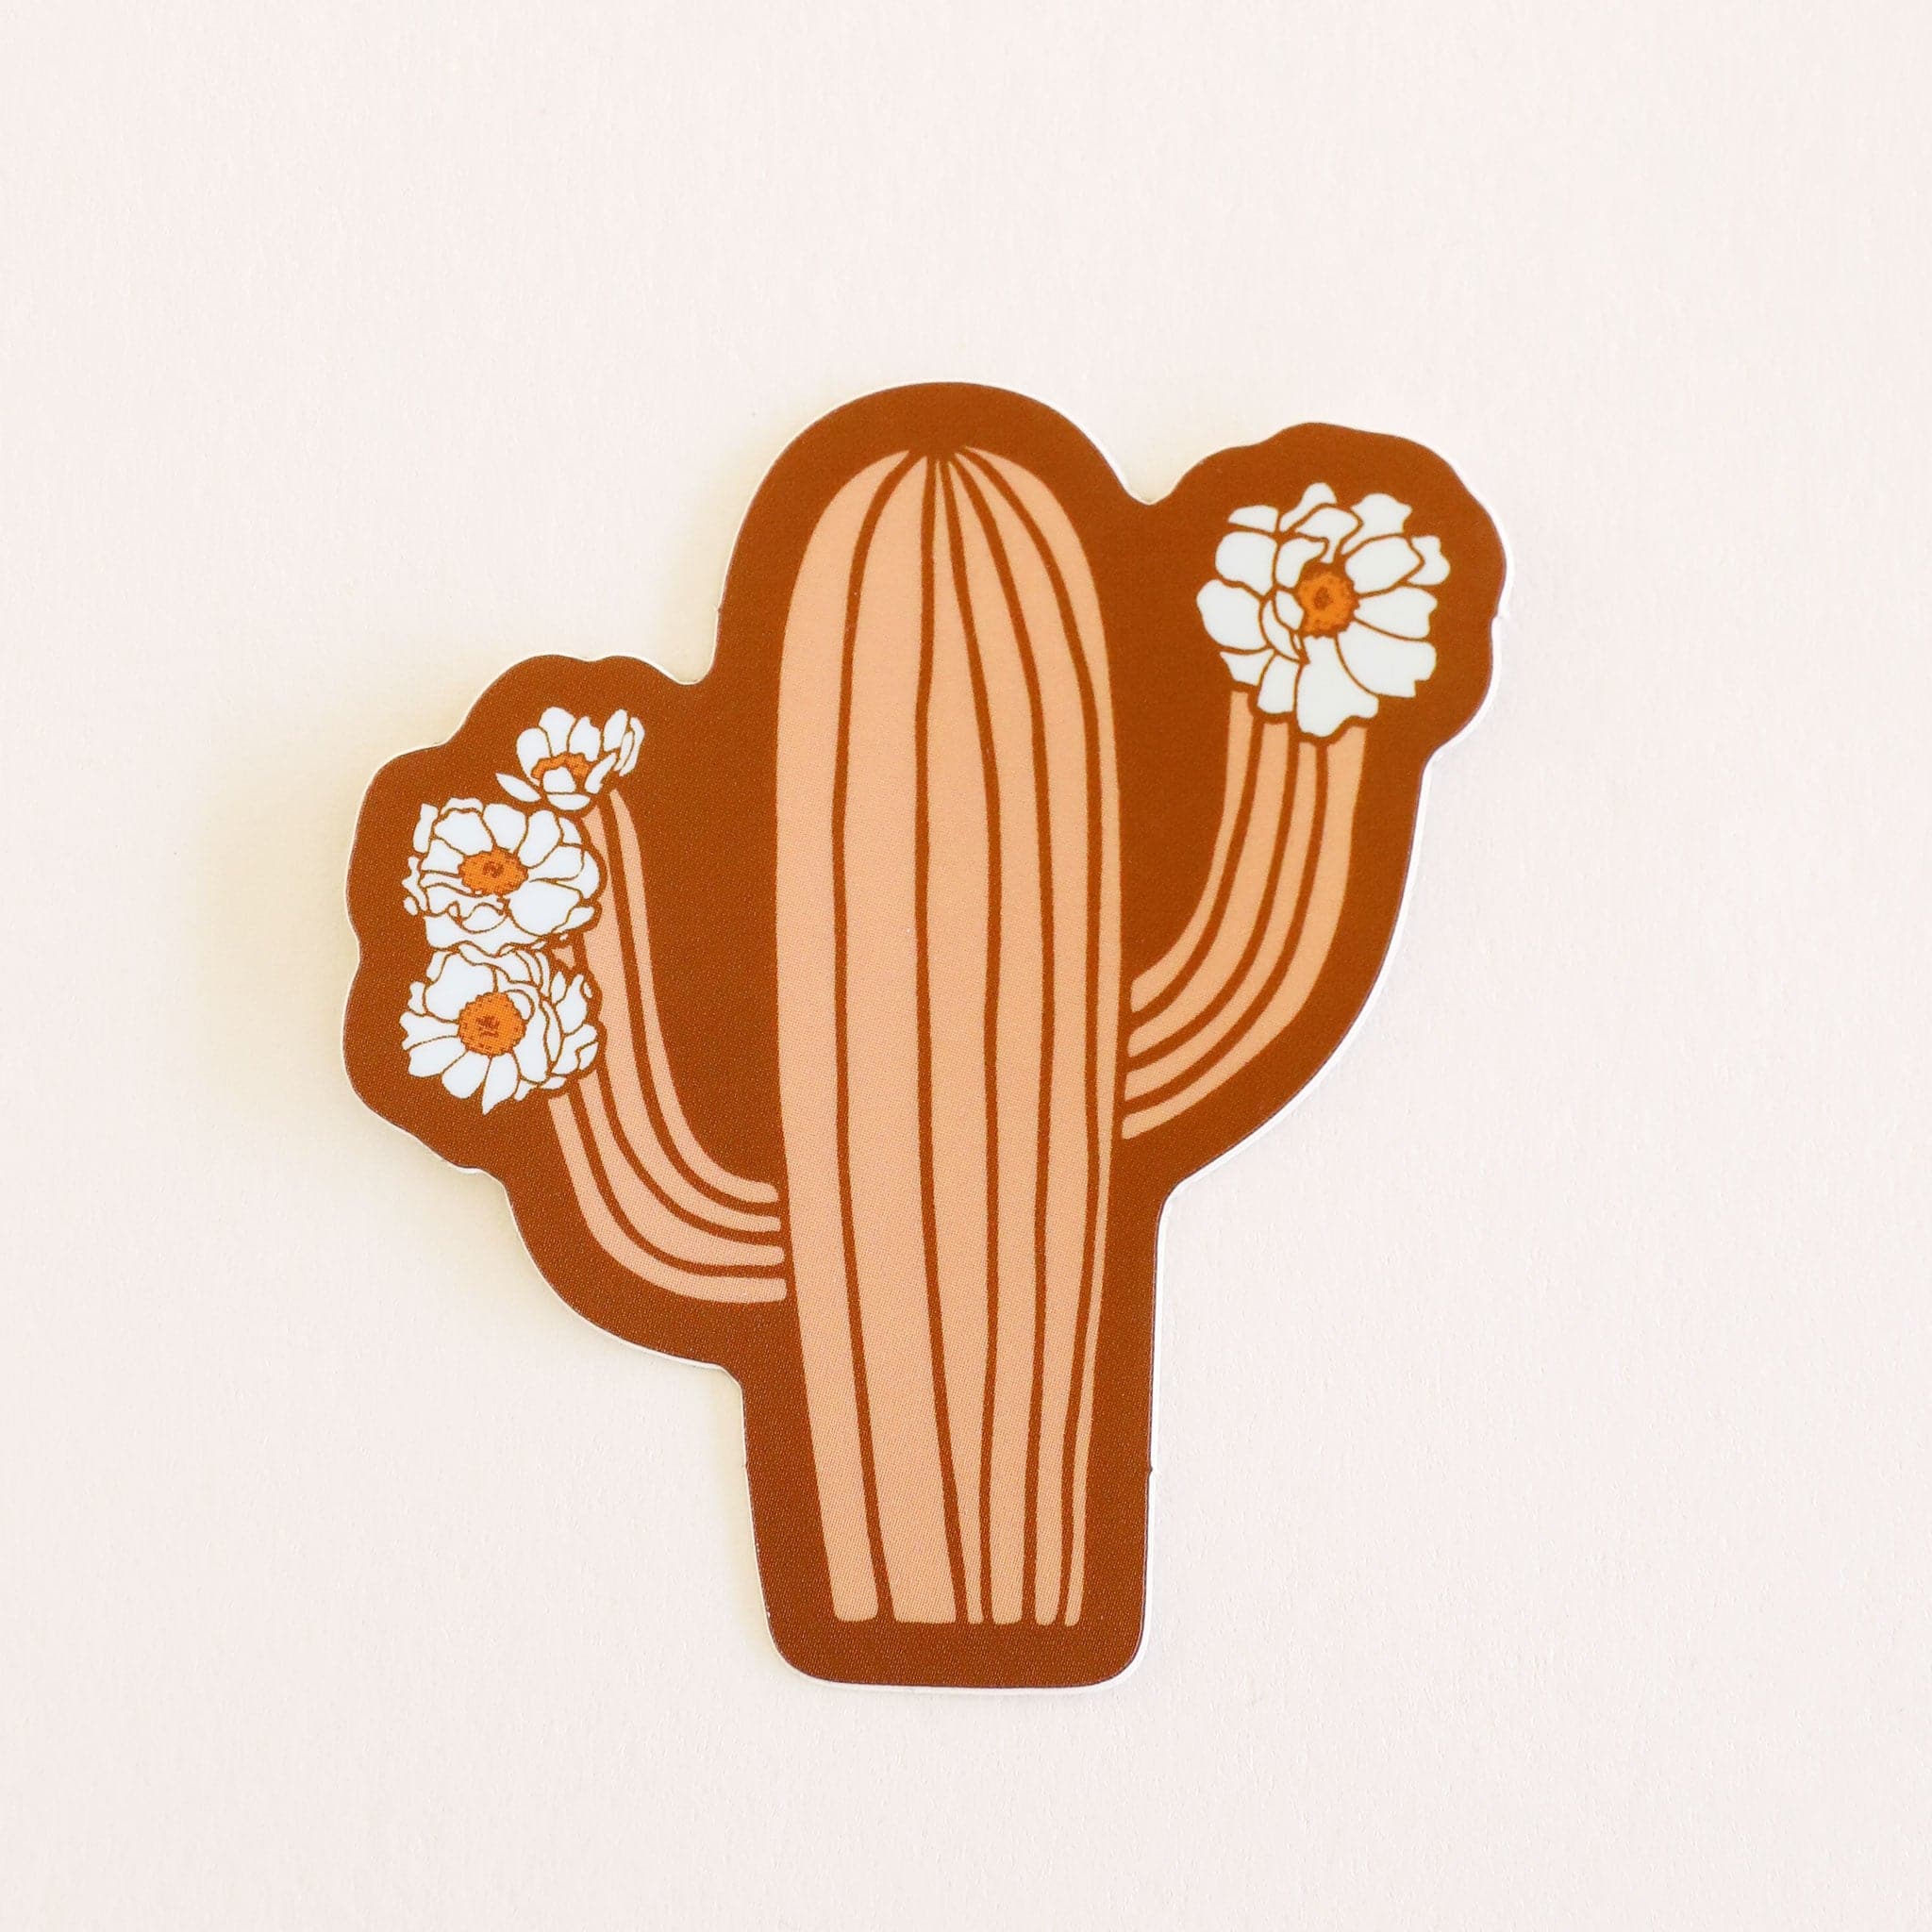 A salmon pink cactus sticker with cactus flowers on each arm.